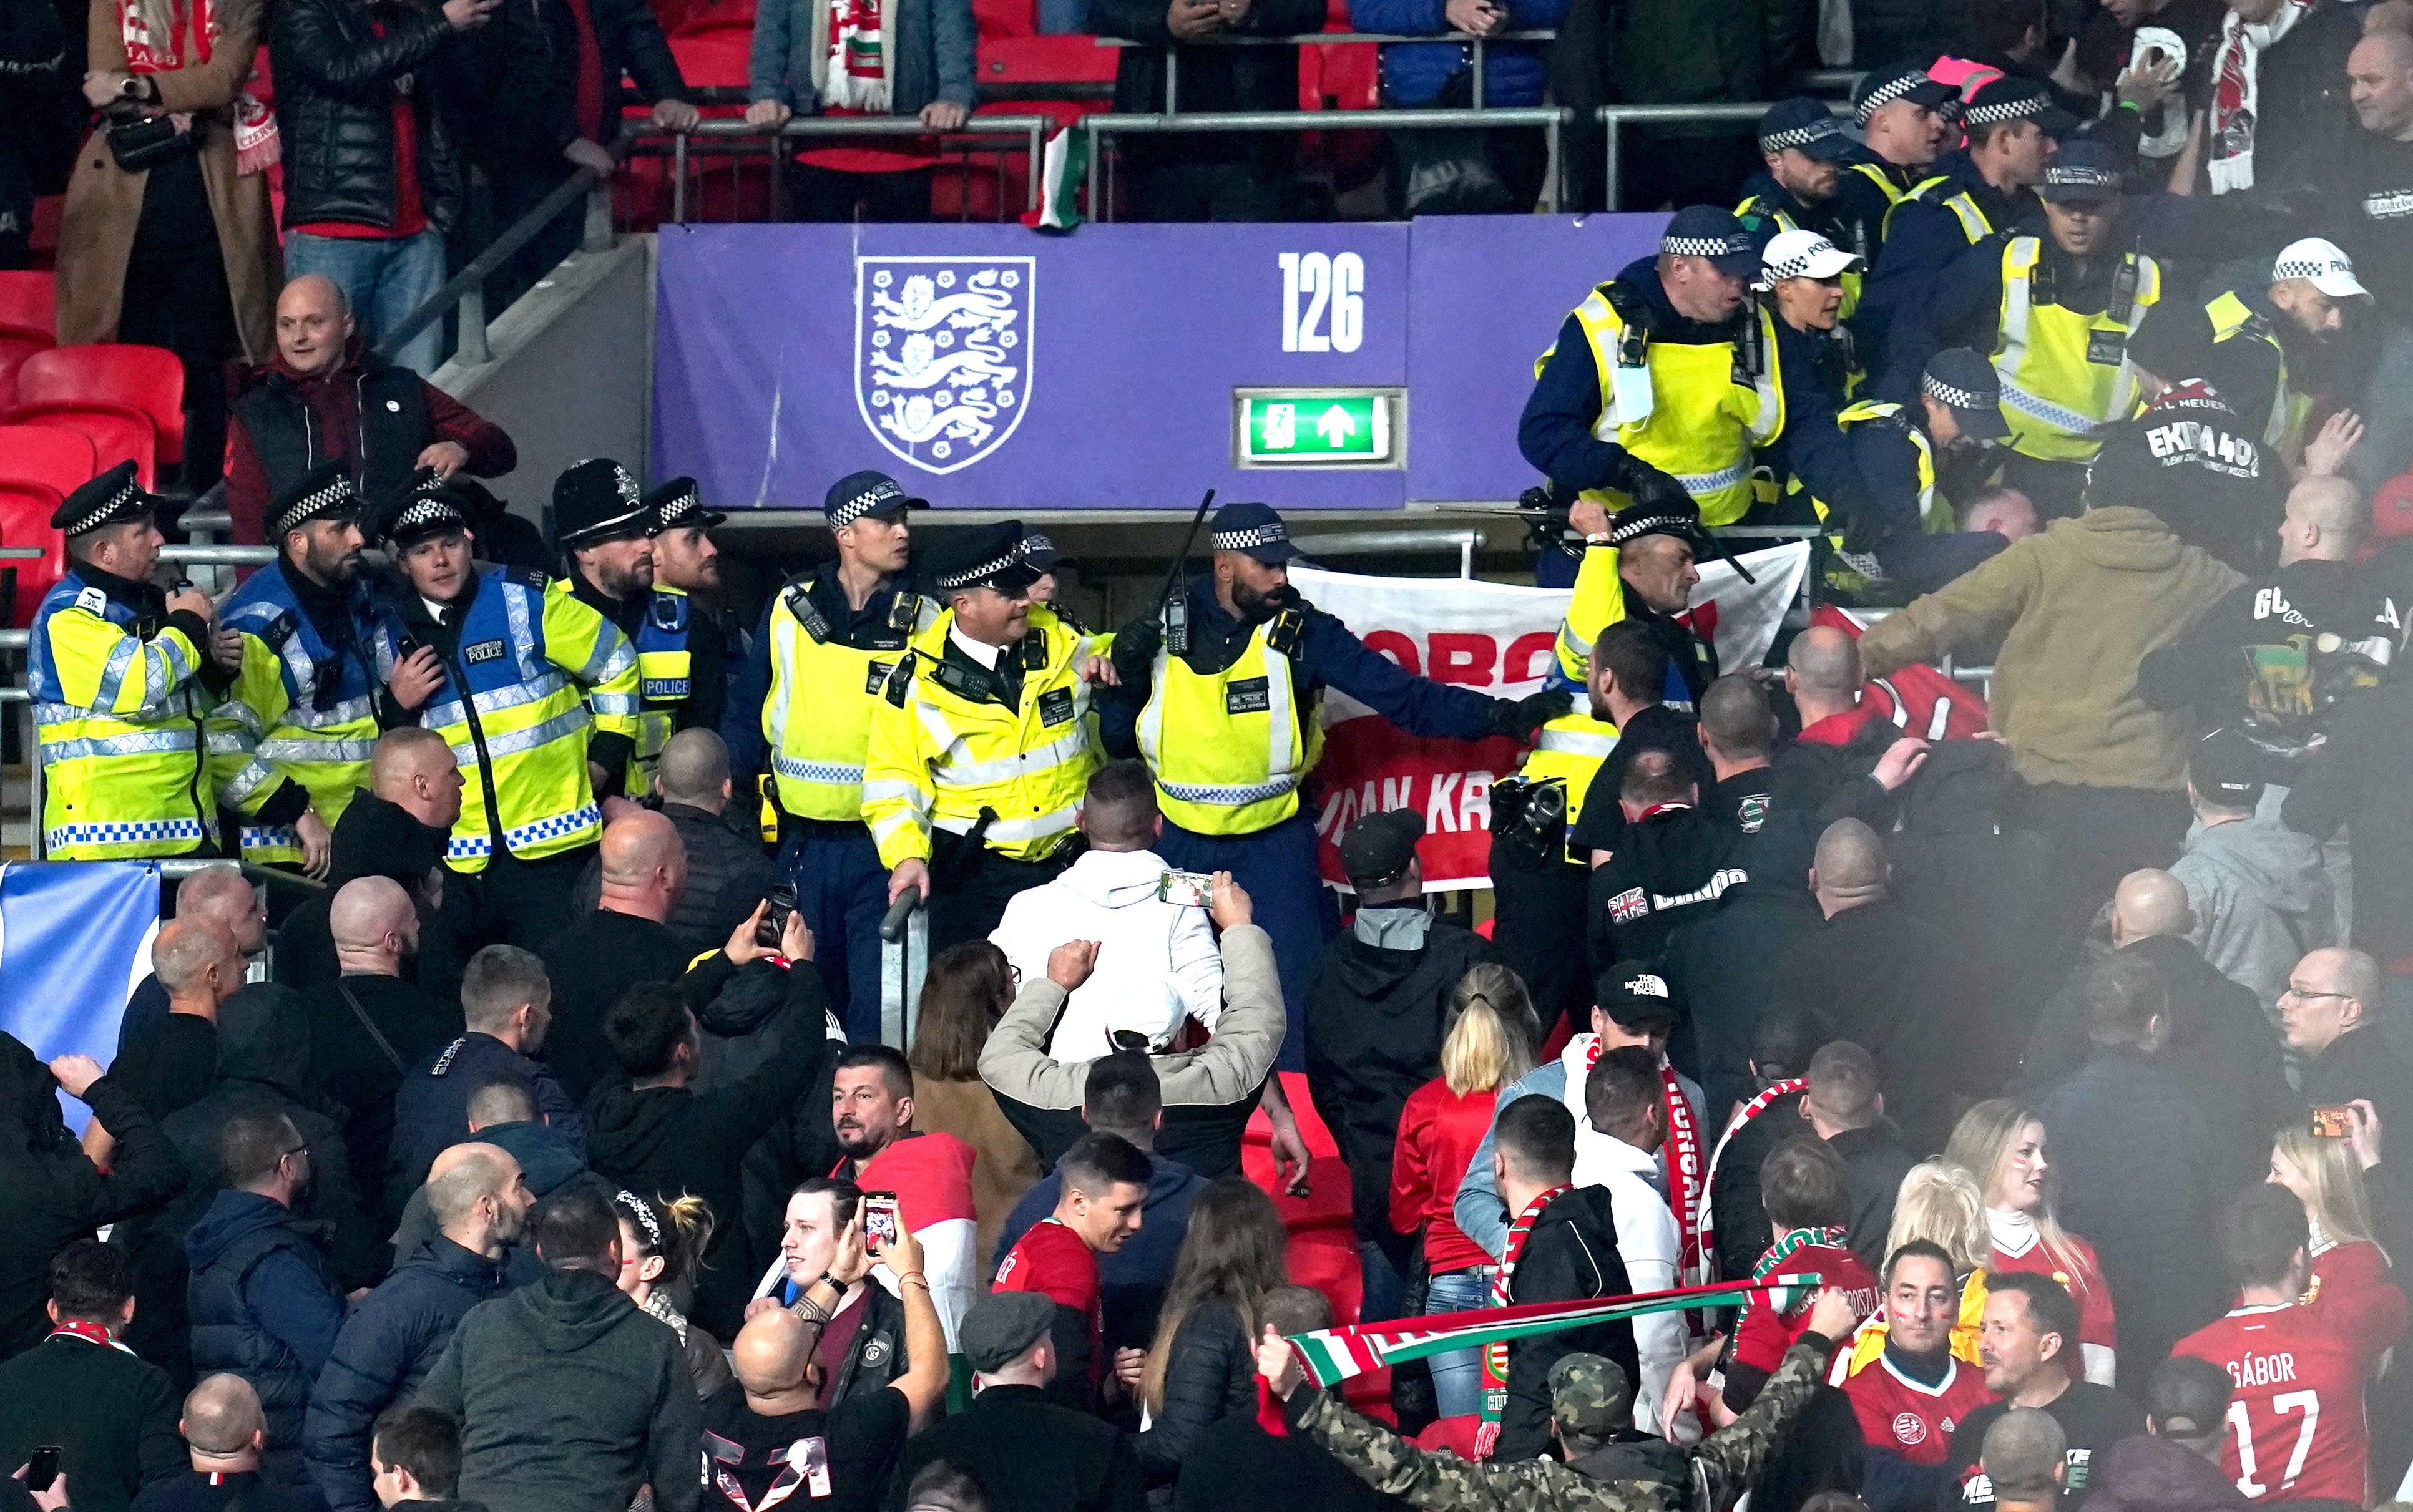 Hungary fans clash with police officers in the stands during October’s World Cup qualifier at Wembley (Nick Potts/PA)